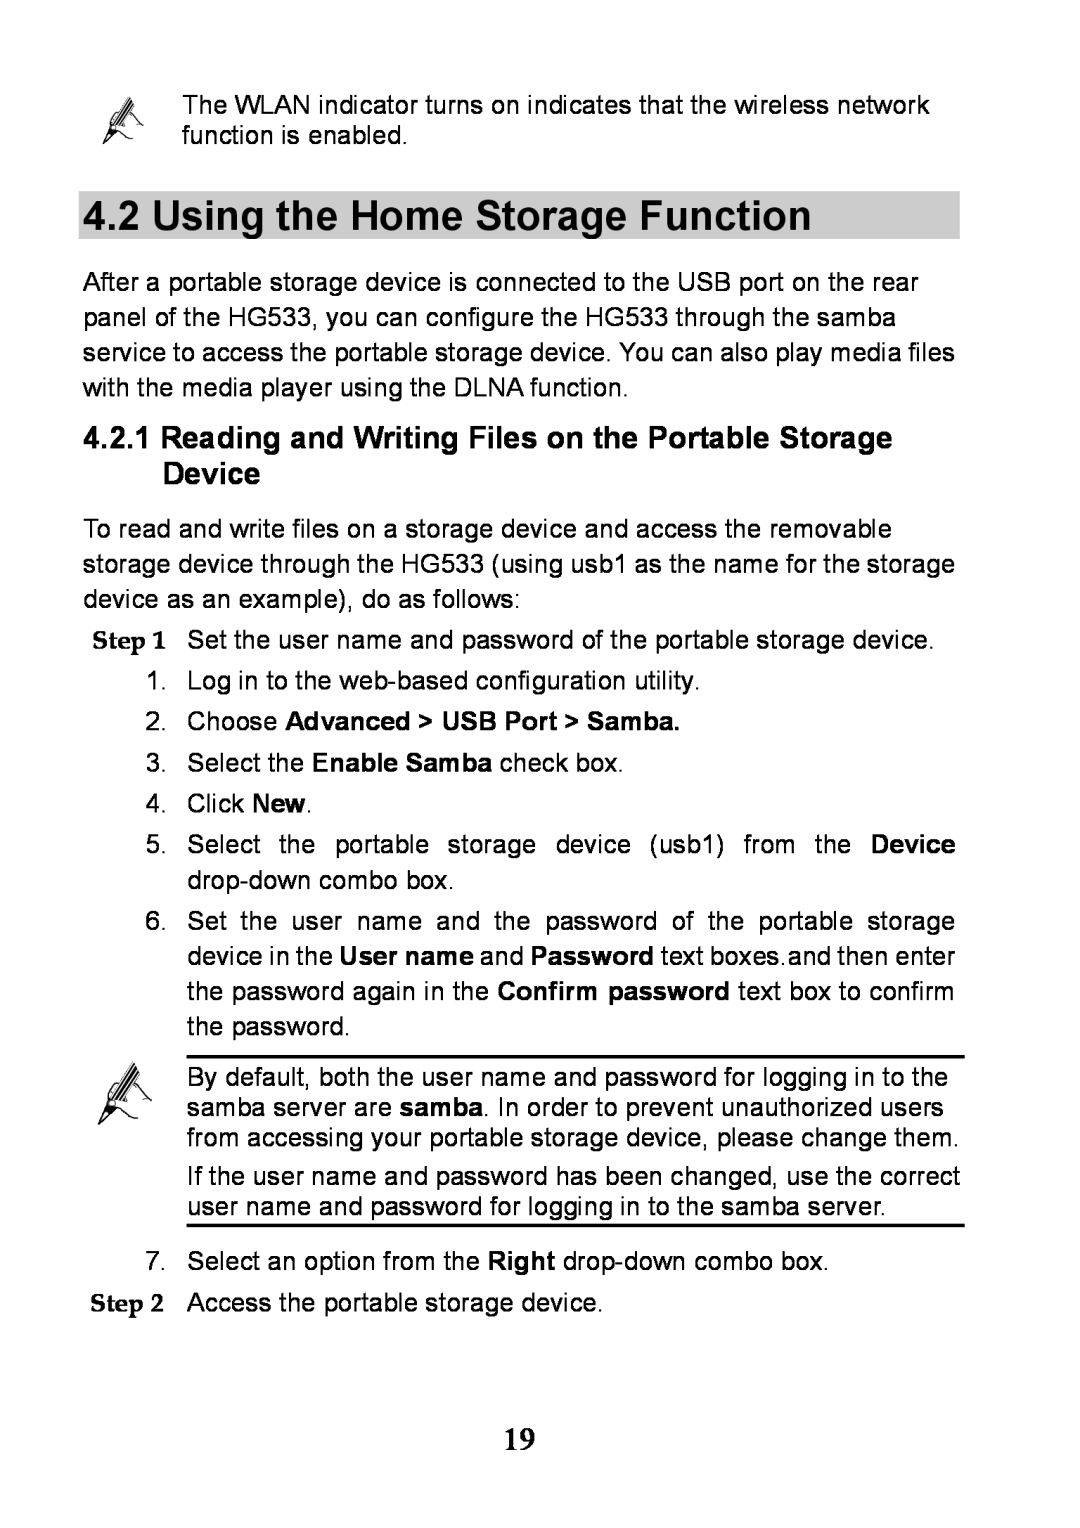 Huawei V100R001 manual Using the Home Storage Function, Reading and Writing Files on the Portable Storage Device 